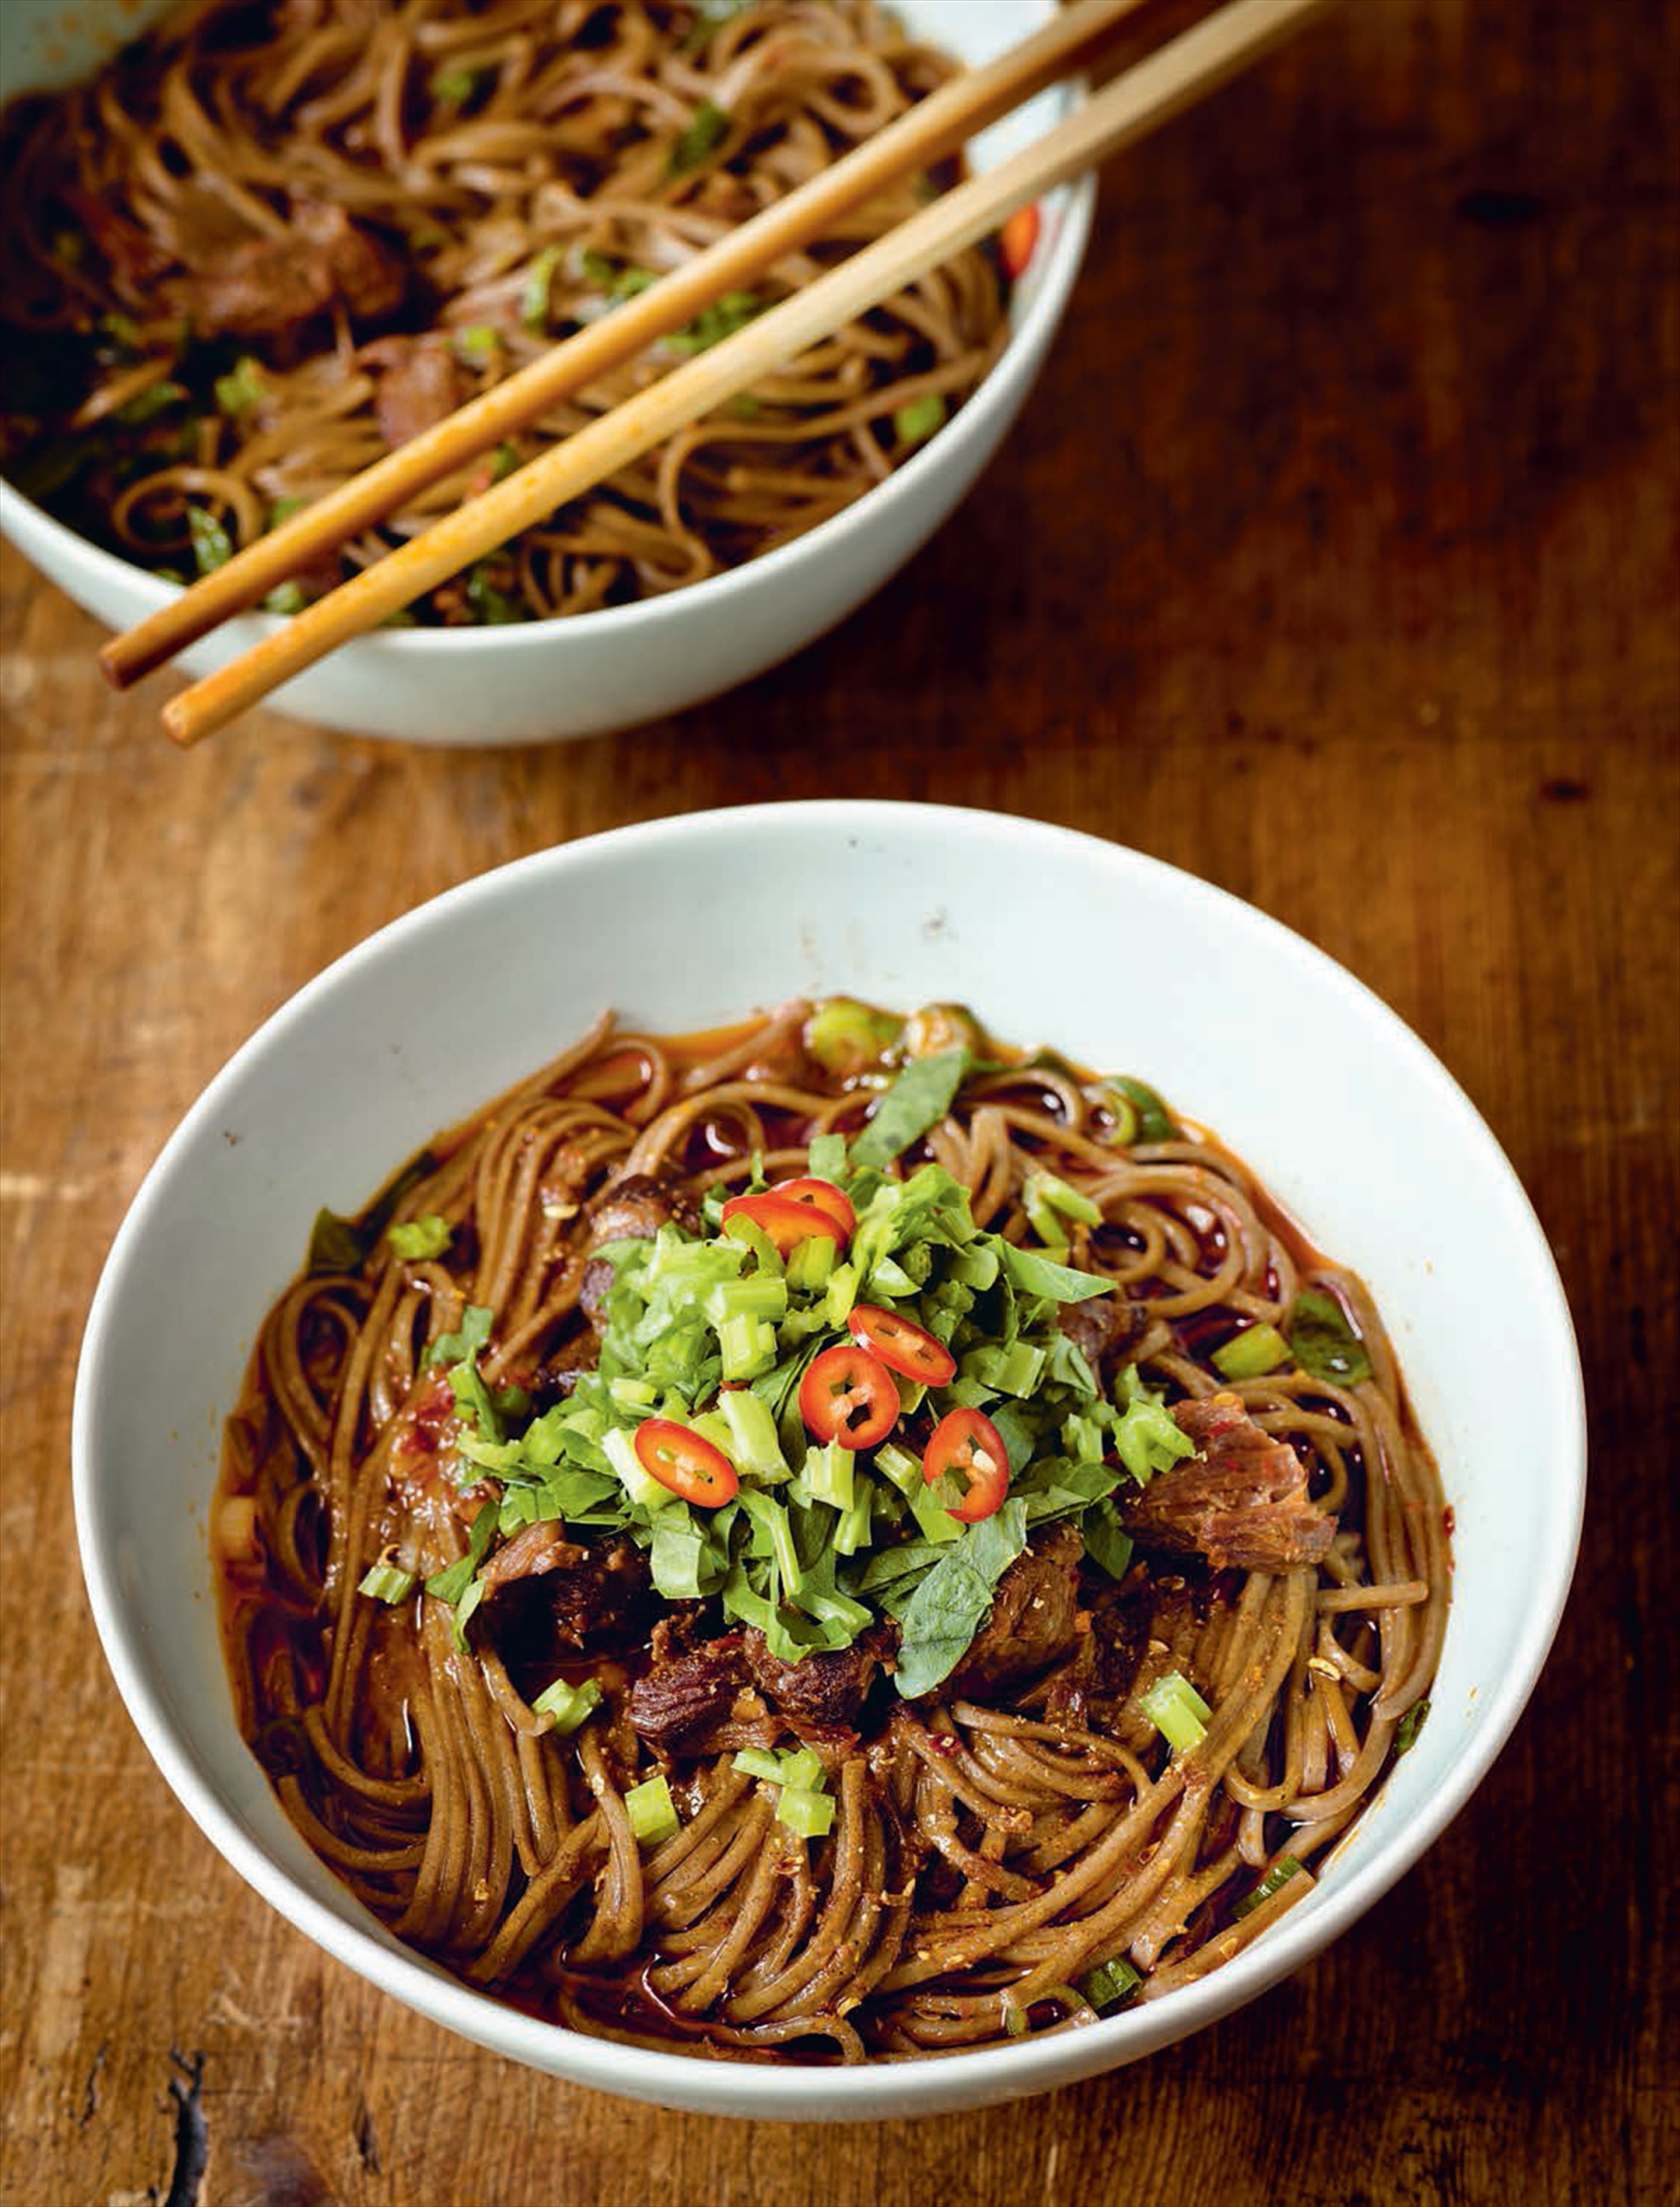 Buckwheat noodles with red-braised beef